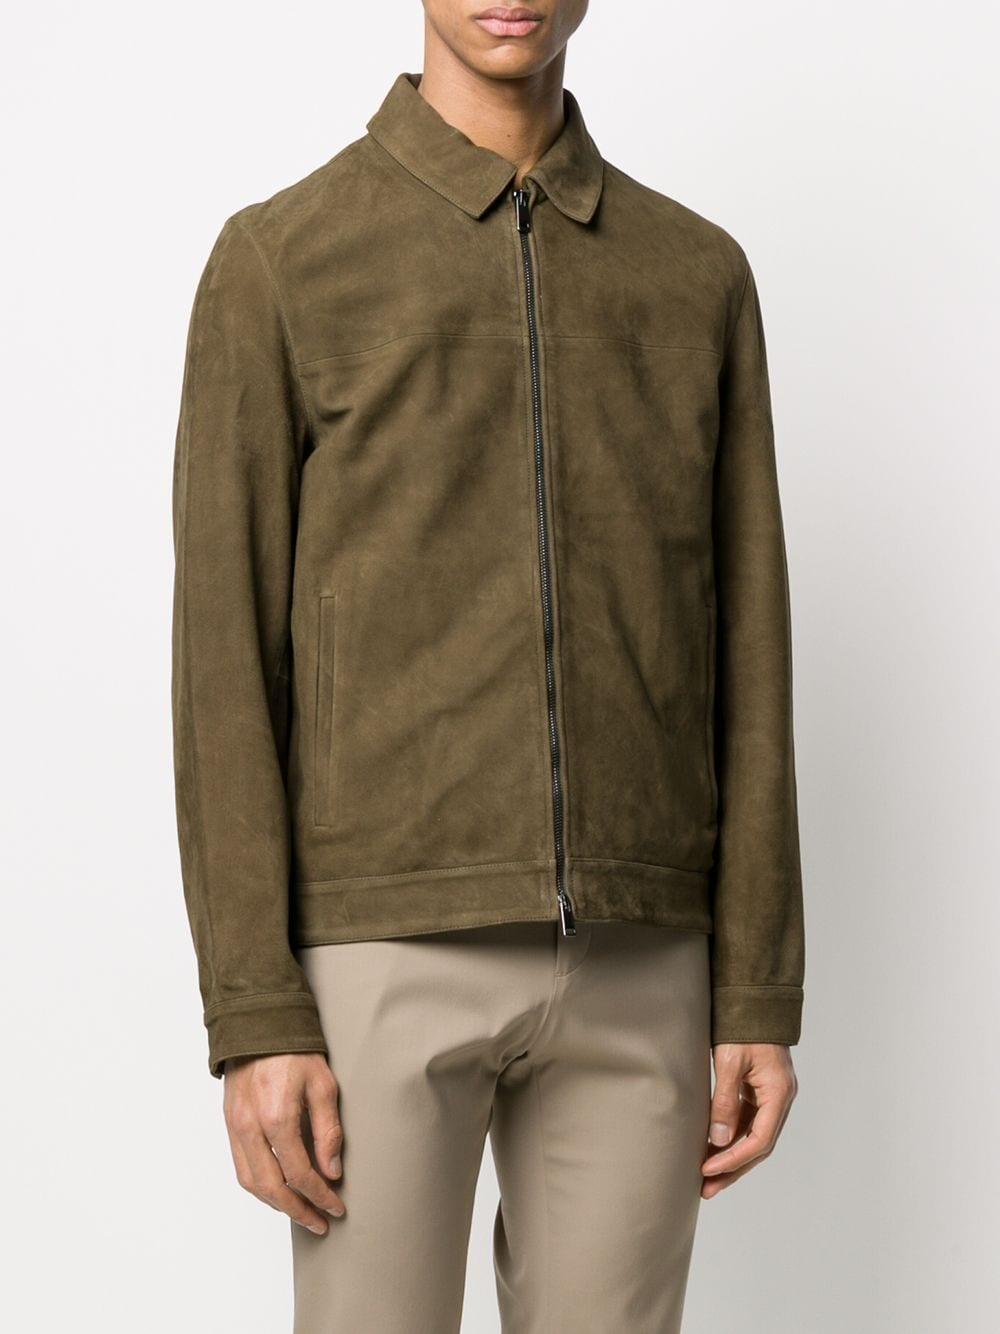 Theory Lightweight Leather Jacket in Green for Men - Lyst